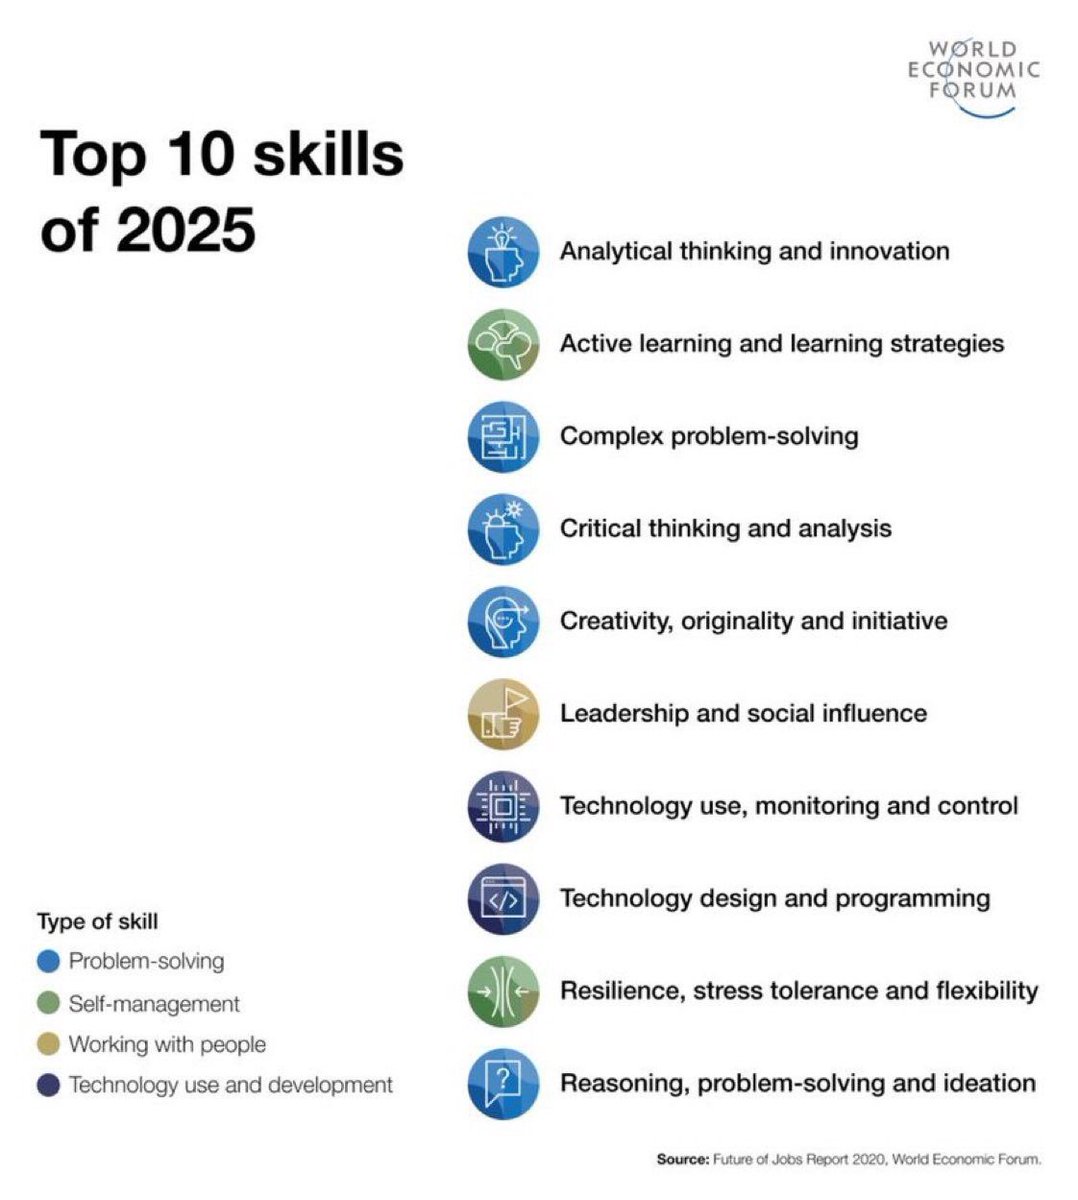 Top 10 skills of 2025: #CCE2020

1 analytical thinking/innovation
2 active learning and strategy
3 complex problem solving
4 critical thinking
5 creativity and originality
6 social influence
7 tech use
8 tech design, programming
9 resilience
10 reasoning, problem solving